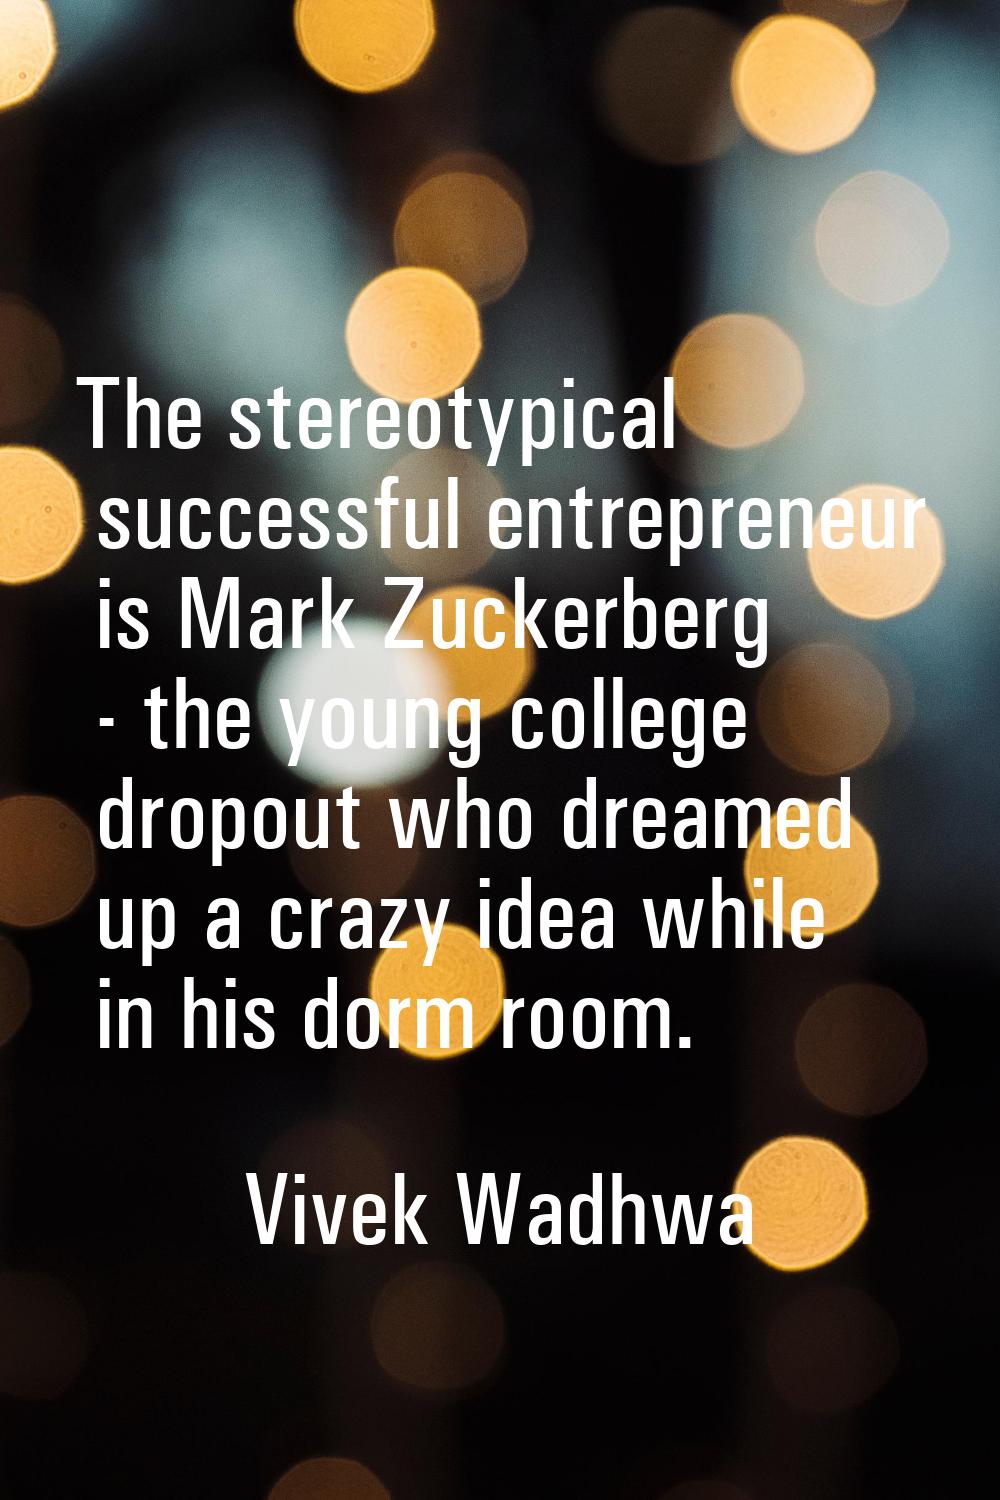 The stereotypical successful entrepreneur is Mark Zuckerberg - the young college dropout who dreame